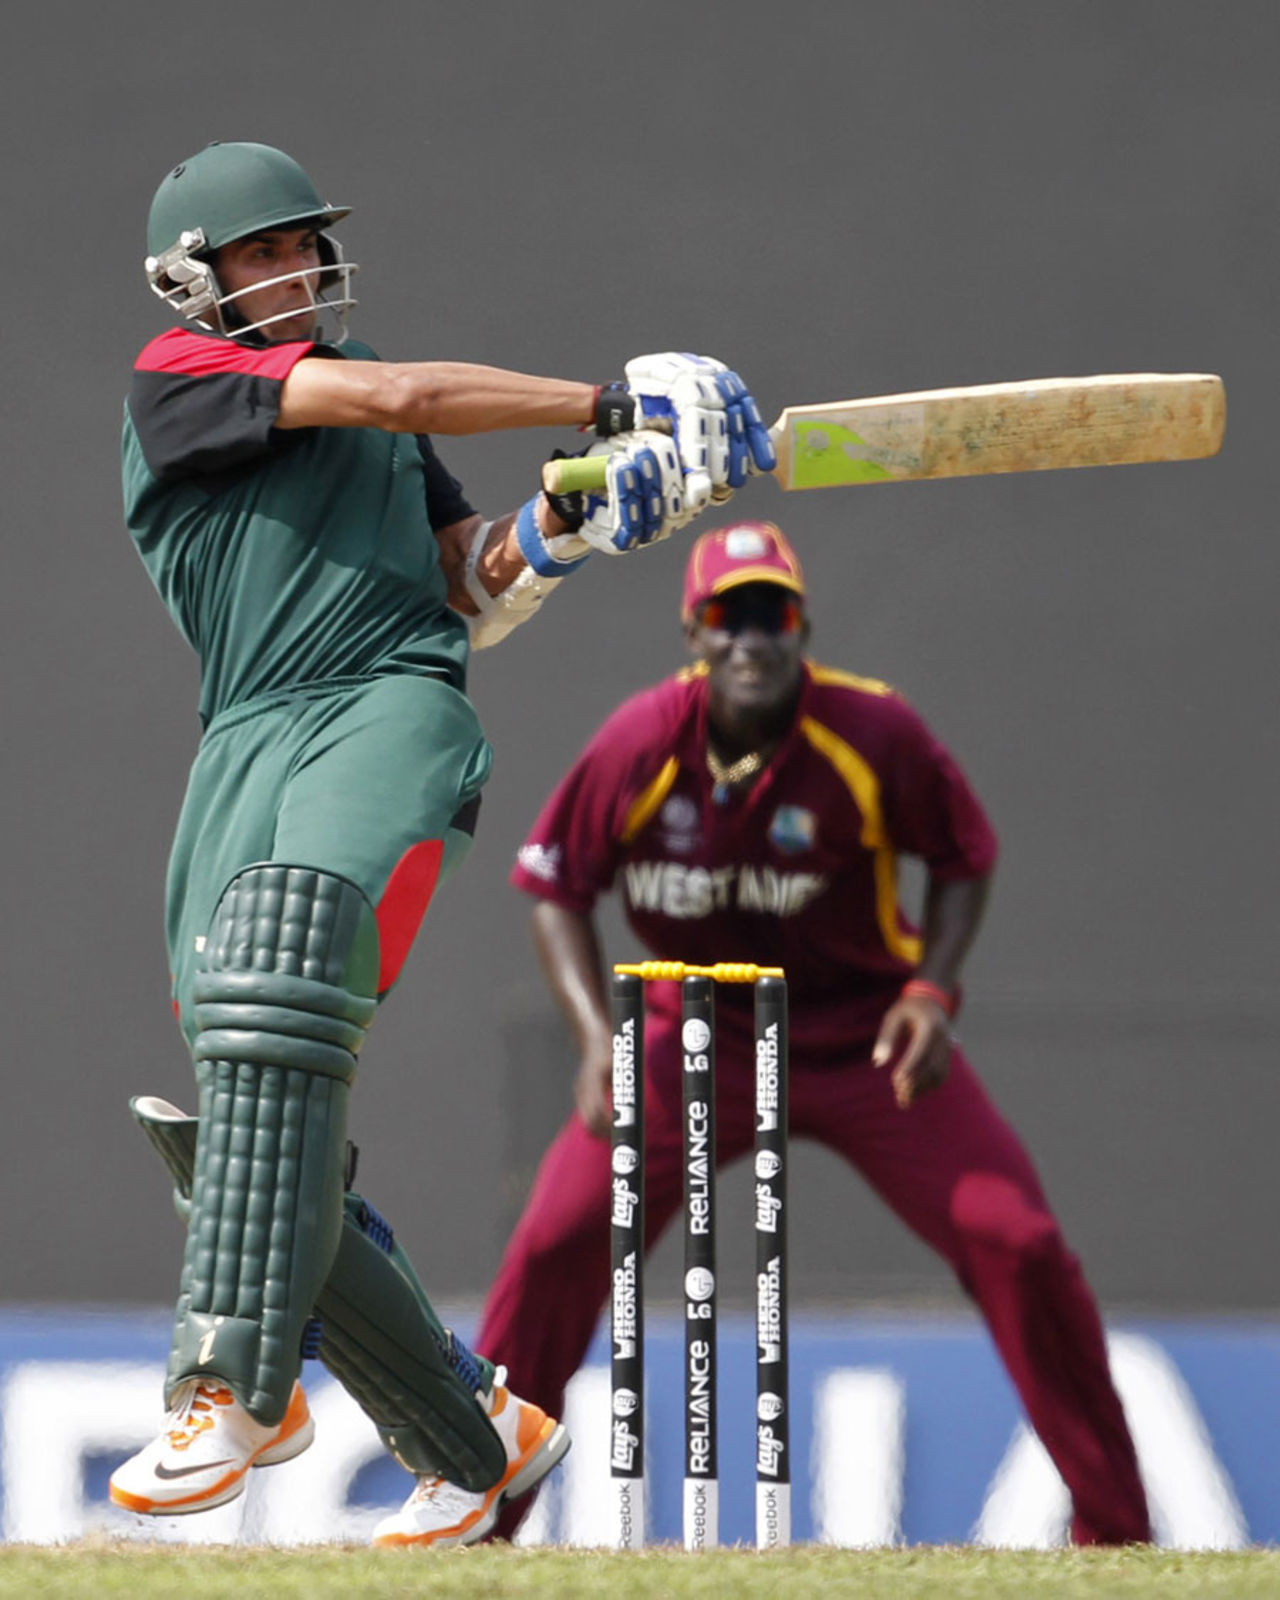 Kenya opener Seren Waters hits to midwicket, Kenya v West Indies World Cup warm-up match, R Premadasa Stadium, Colombo, February 12, 2011